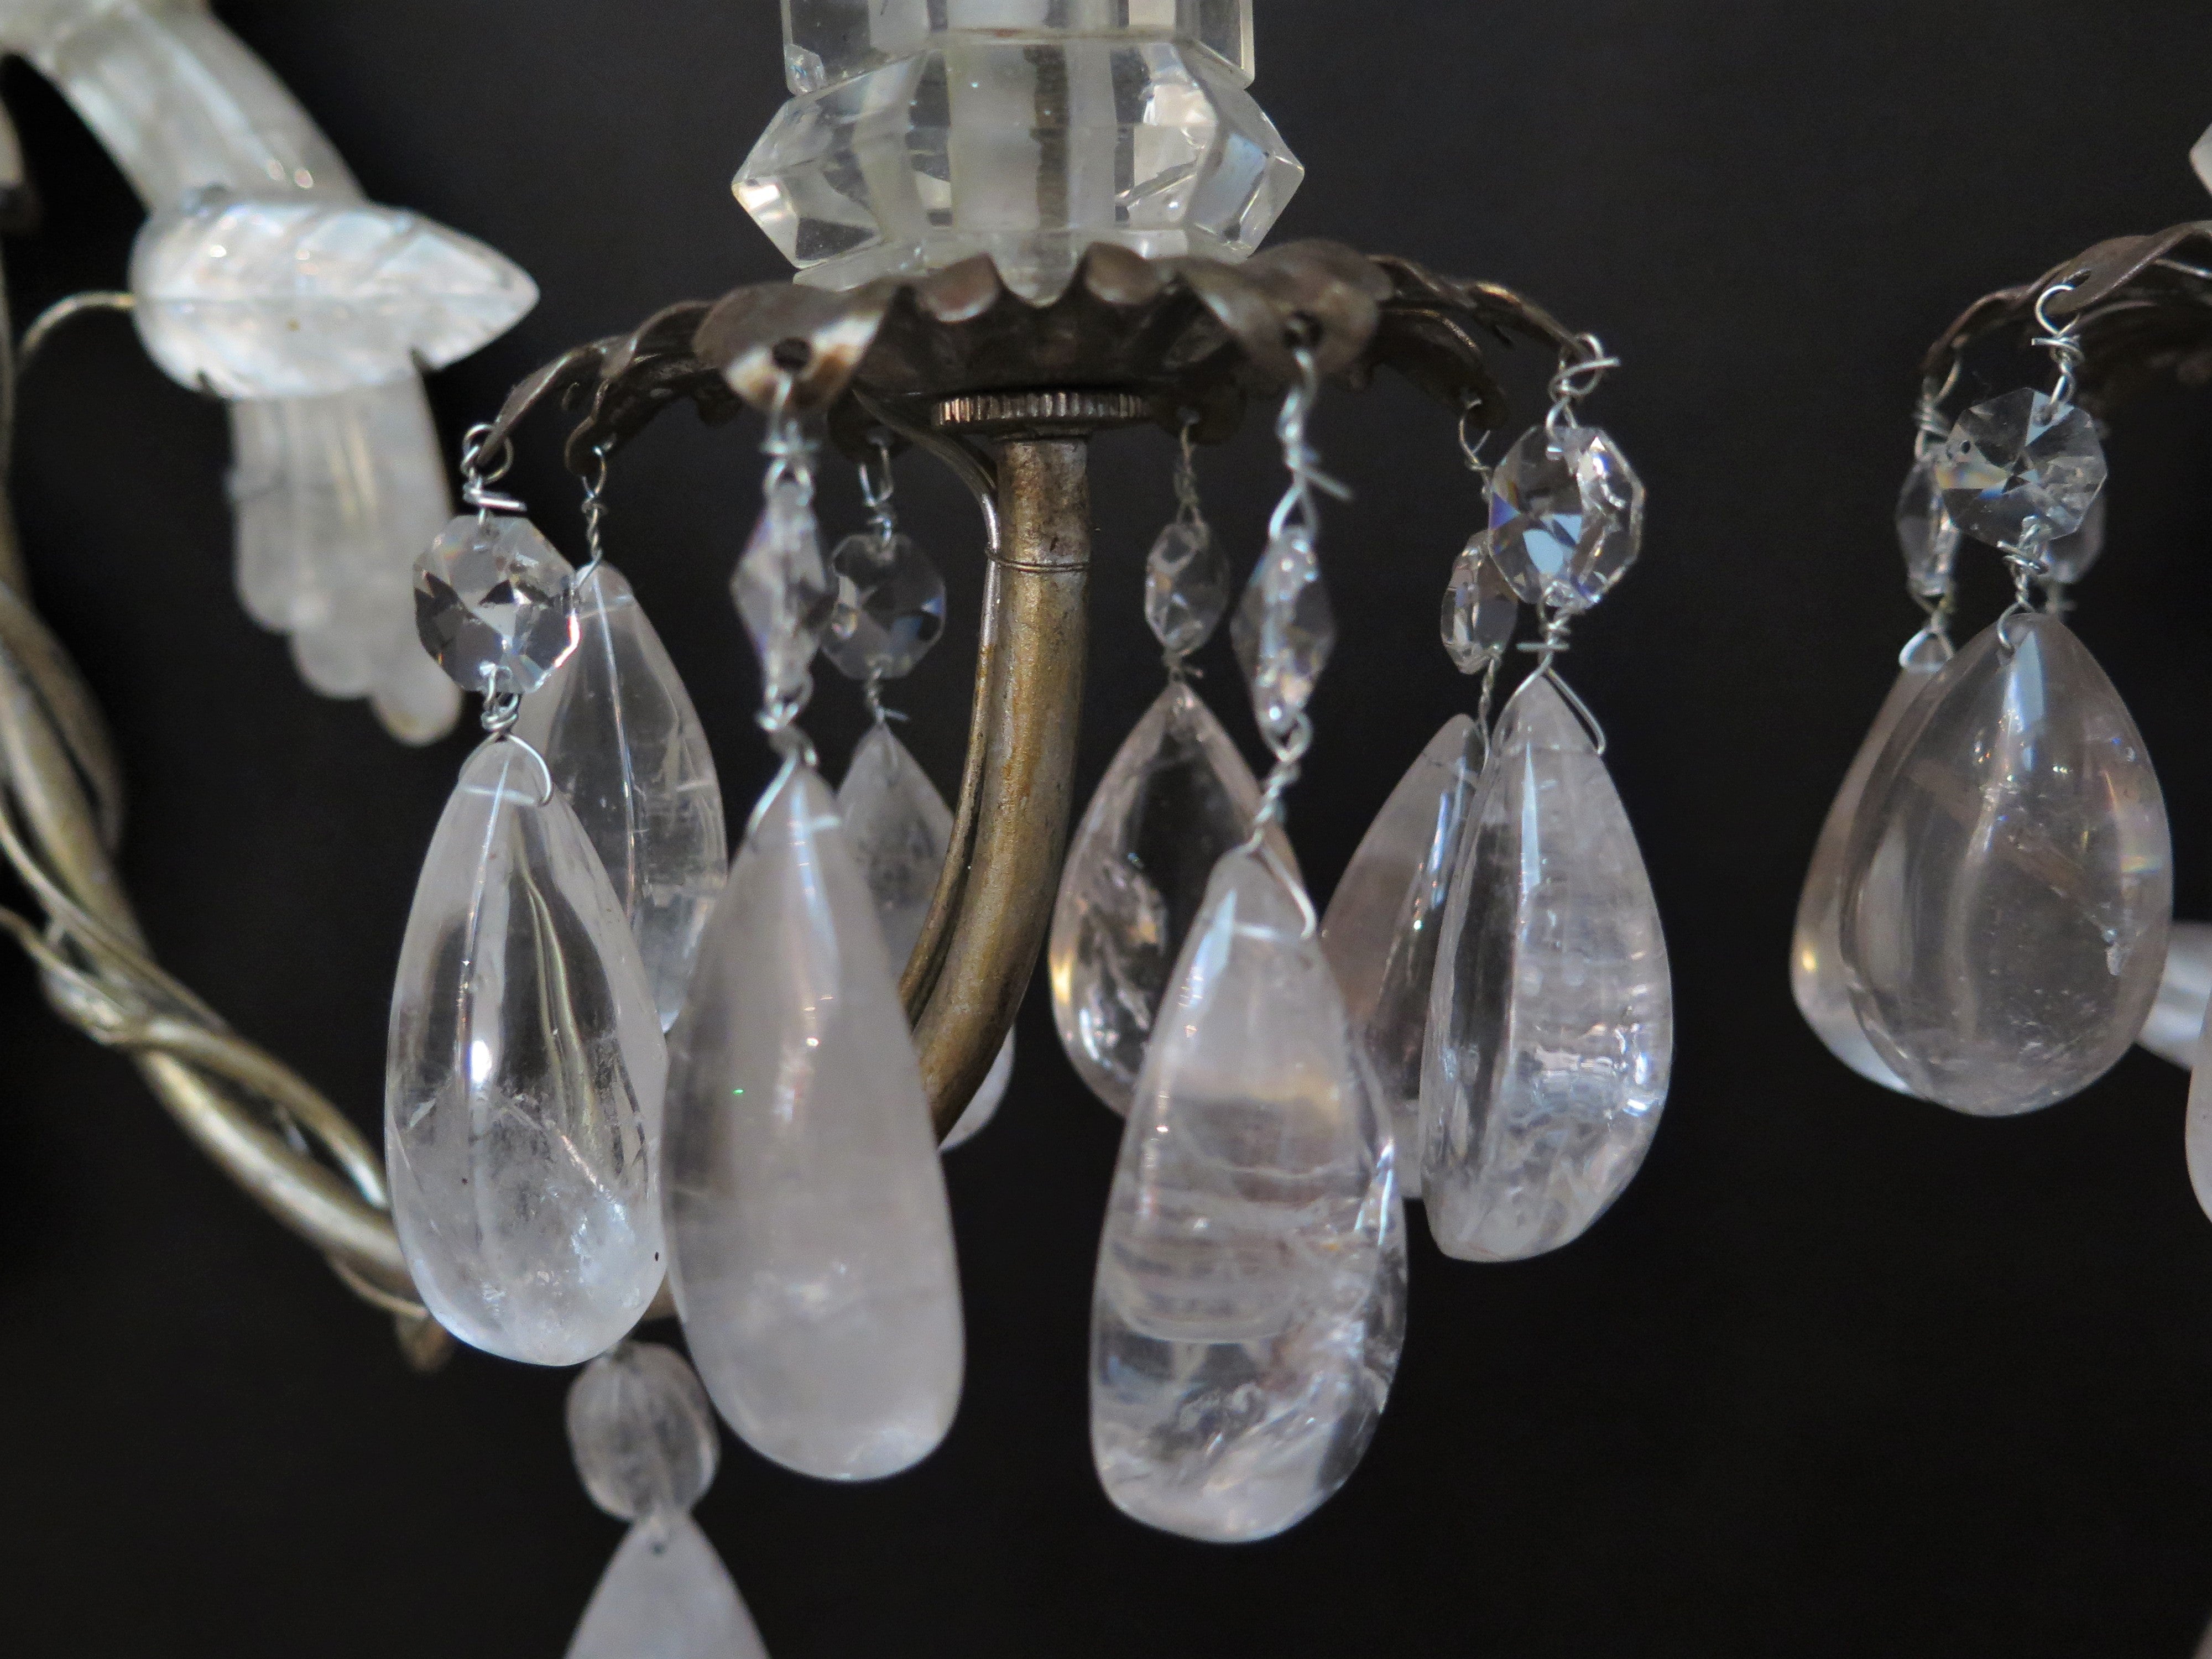 A Pair of 20th Century French Rock Crystal and Glass Three-Light Sconces